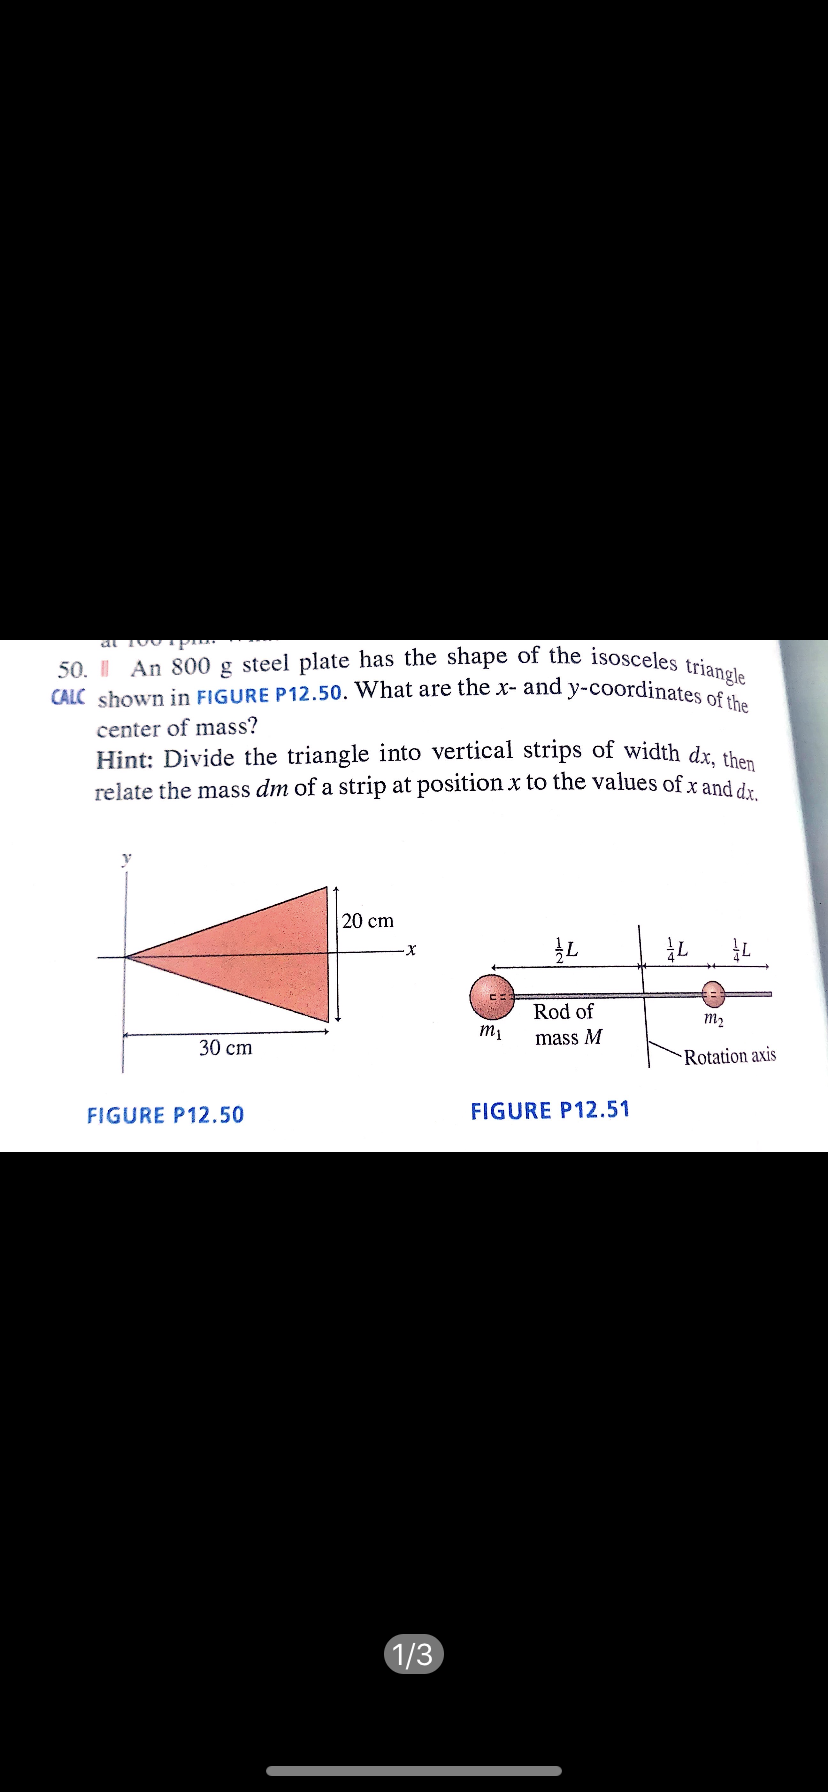 50. I An 800 g steel plate has the shape of the isosceles triangle
CALC shown in FIGURE P12.50. What are the x- and y-coordinates of the
center of mass?
Hint: Divide the triangle into vertical strips of width dr the
relate the mass dm of a strip at position x to the values of x and dr
20 cm
Rod of
т,
тy
mass M
30 ст
Rotation axis
FIGURE P12.50
FIGURE P12.51
1/3
